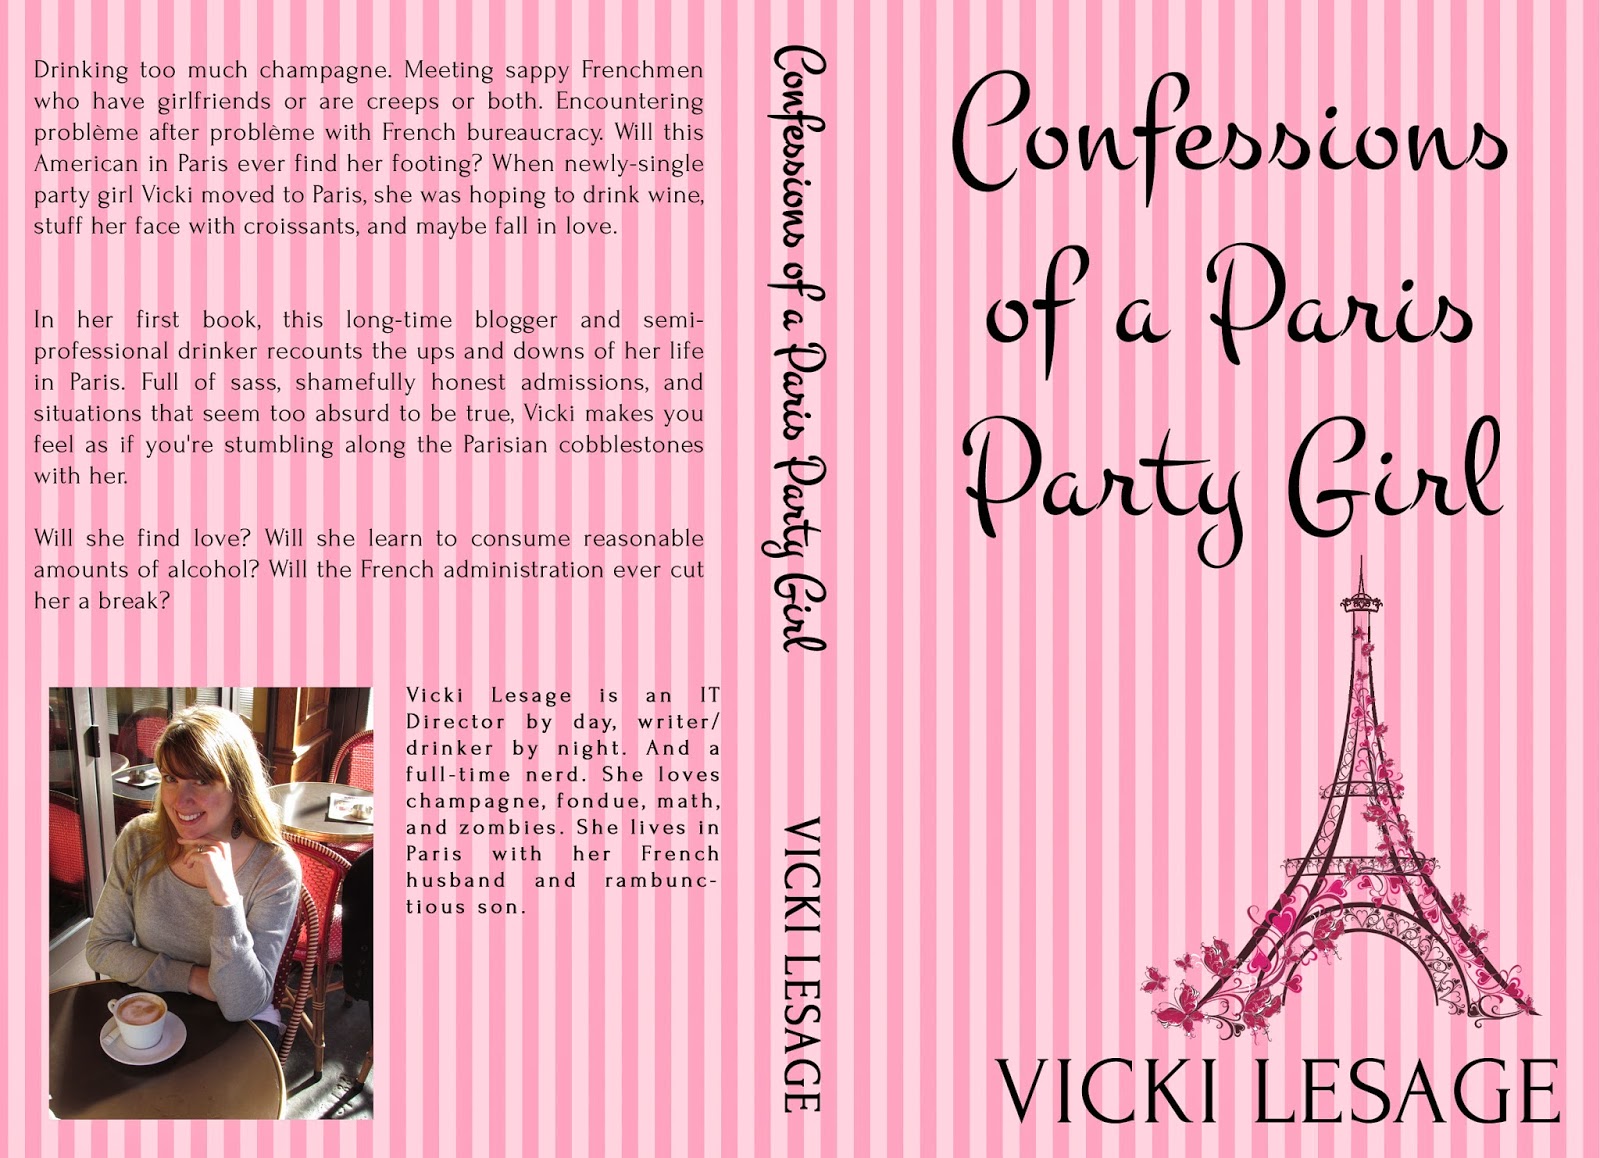 Mock-up book cover for "Confessions of a Paris Party Girl" by Vicki Lesage